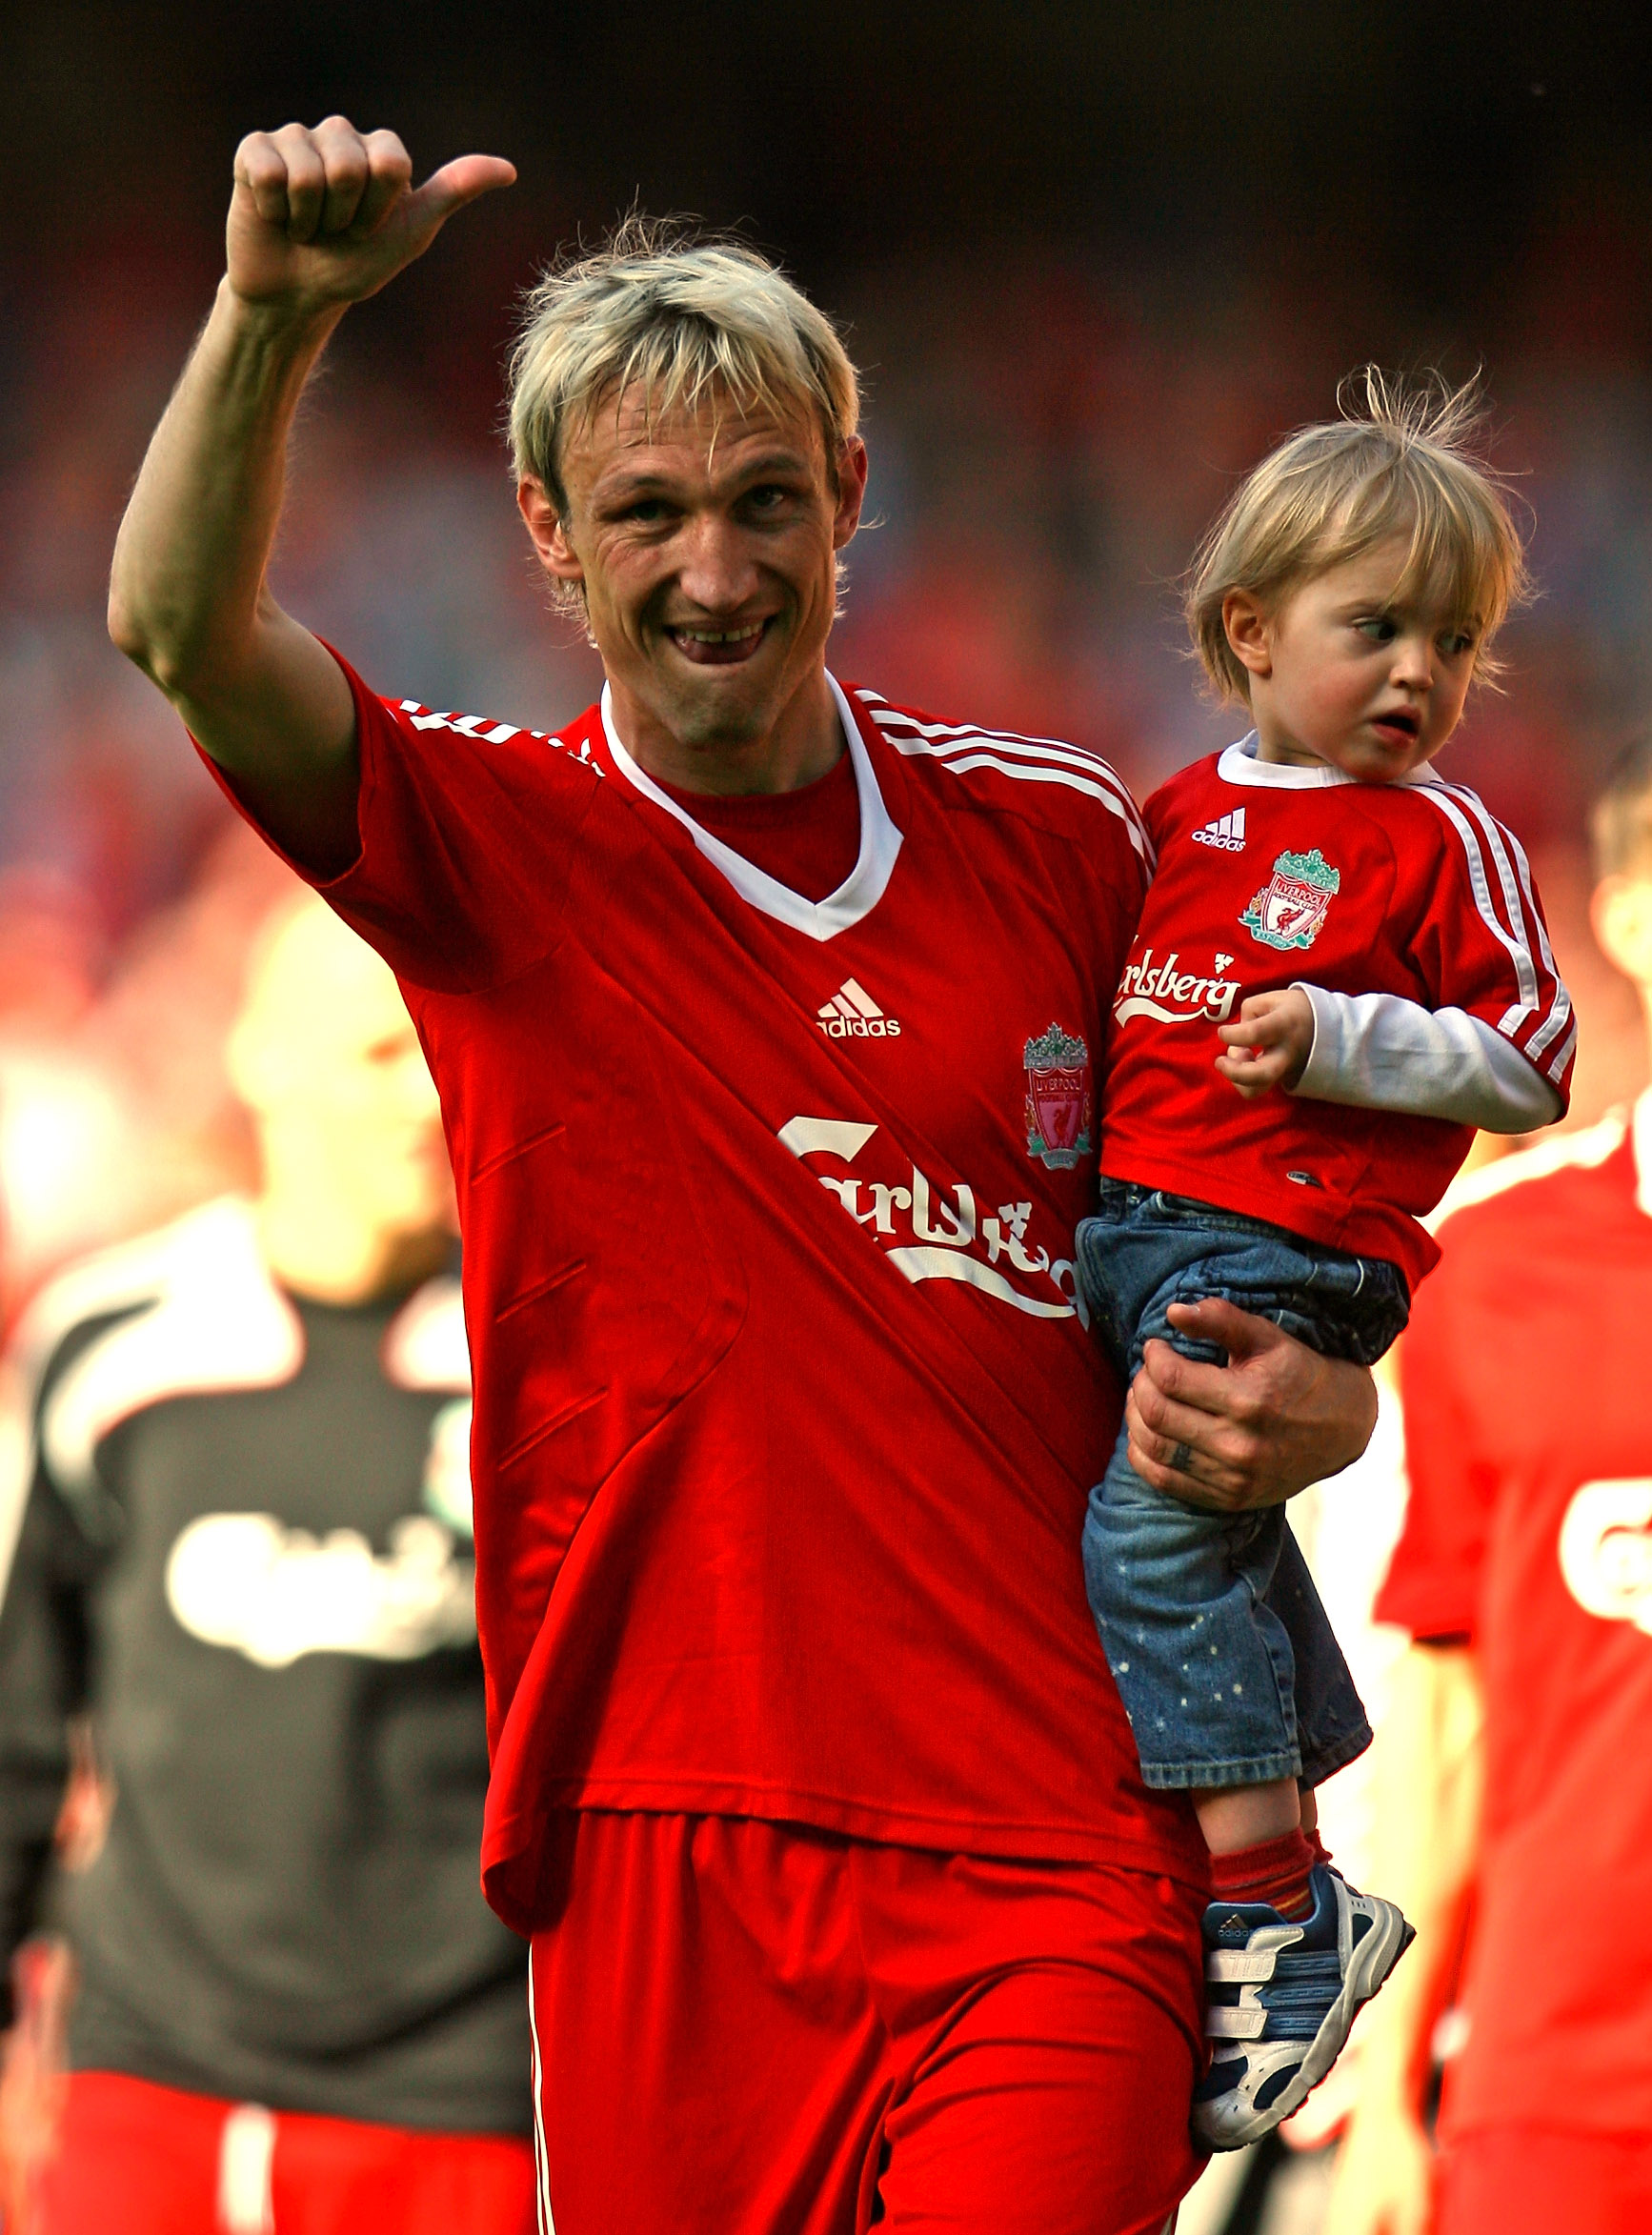 LIVERPOOL, ENGLAND - MAY 24:  Sami Hyypia of Liverpool waves to the Kop after playing his last game for Liverpool in the Barclays  Premier League match between Liverpool and Tottenham Hotspur at Anfield on May 24, 2009 in Liverpool, England.  (Photo by Al